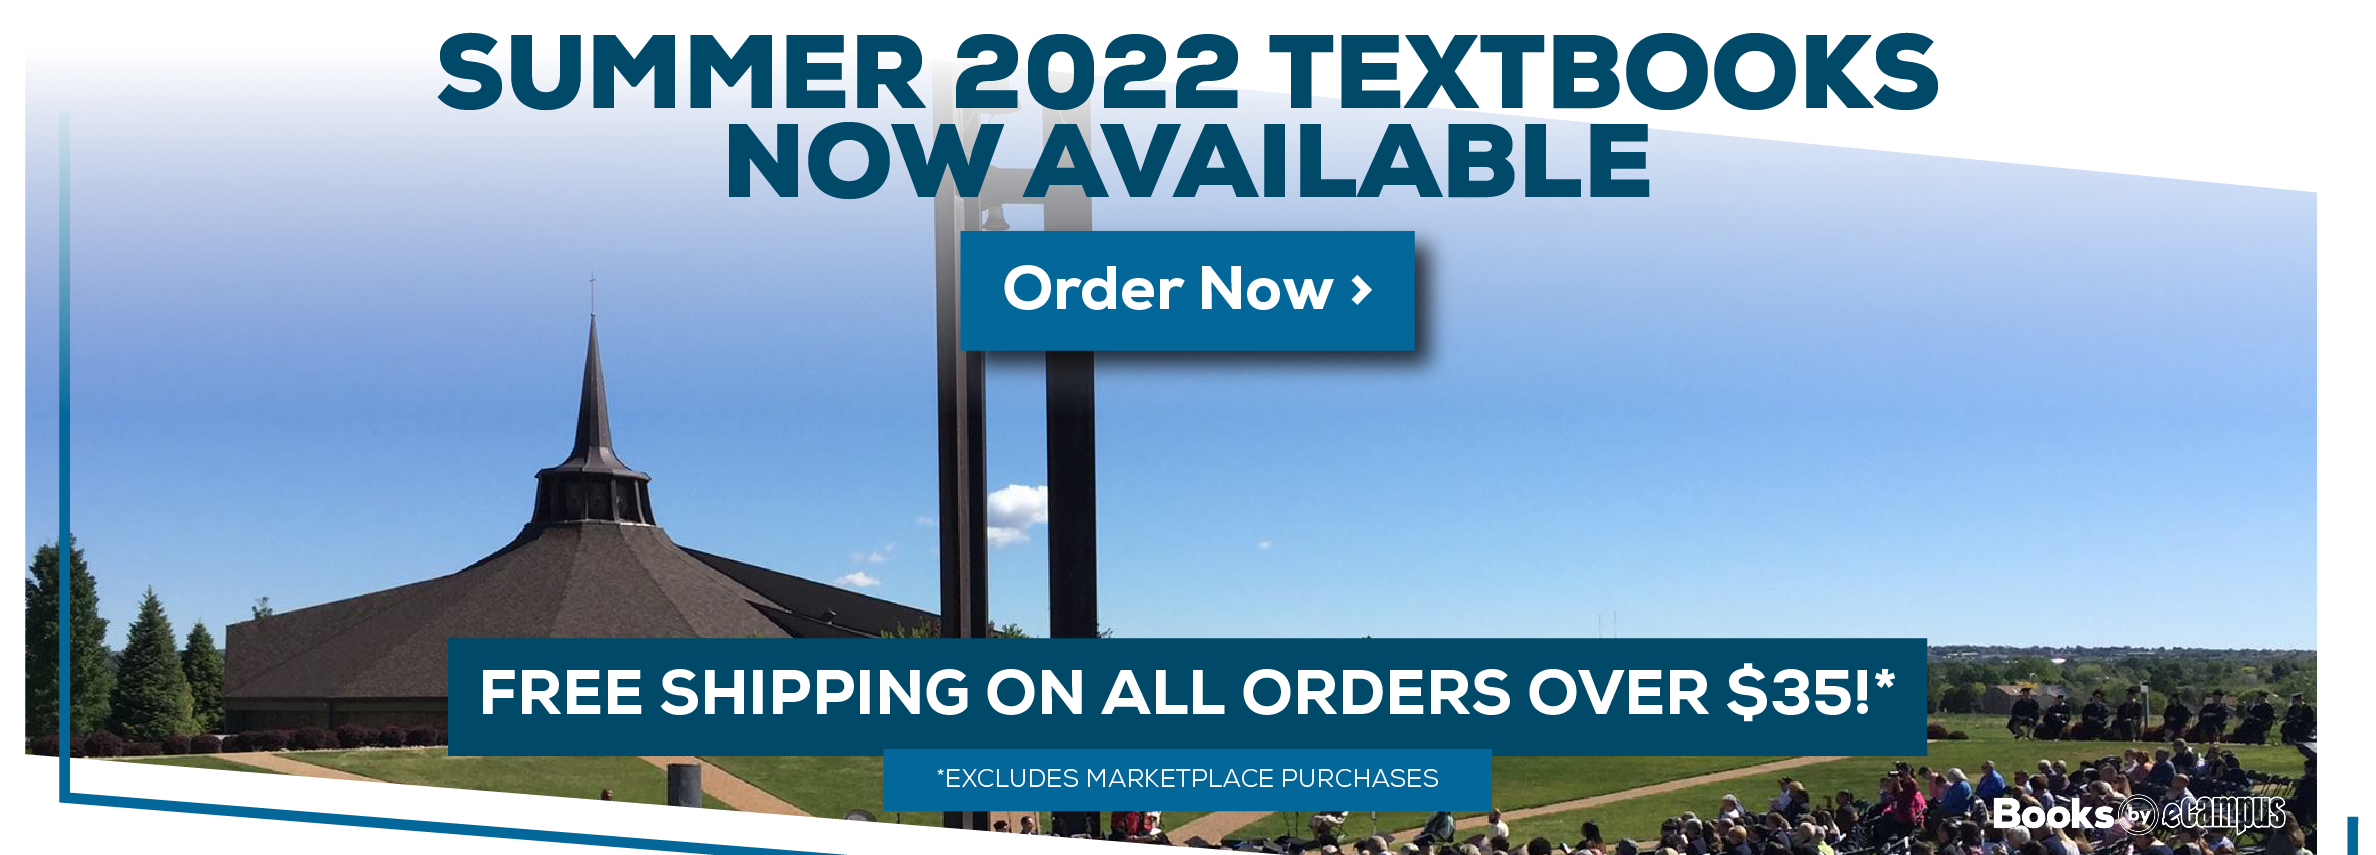 Summer 2022 Textbooks now available. order now. Free shipping on all orders over $35